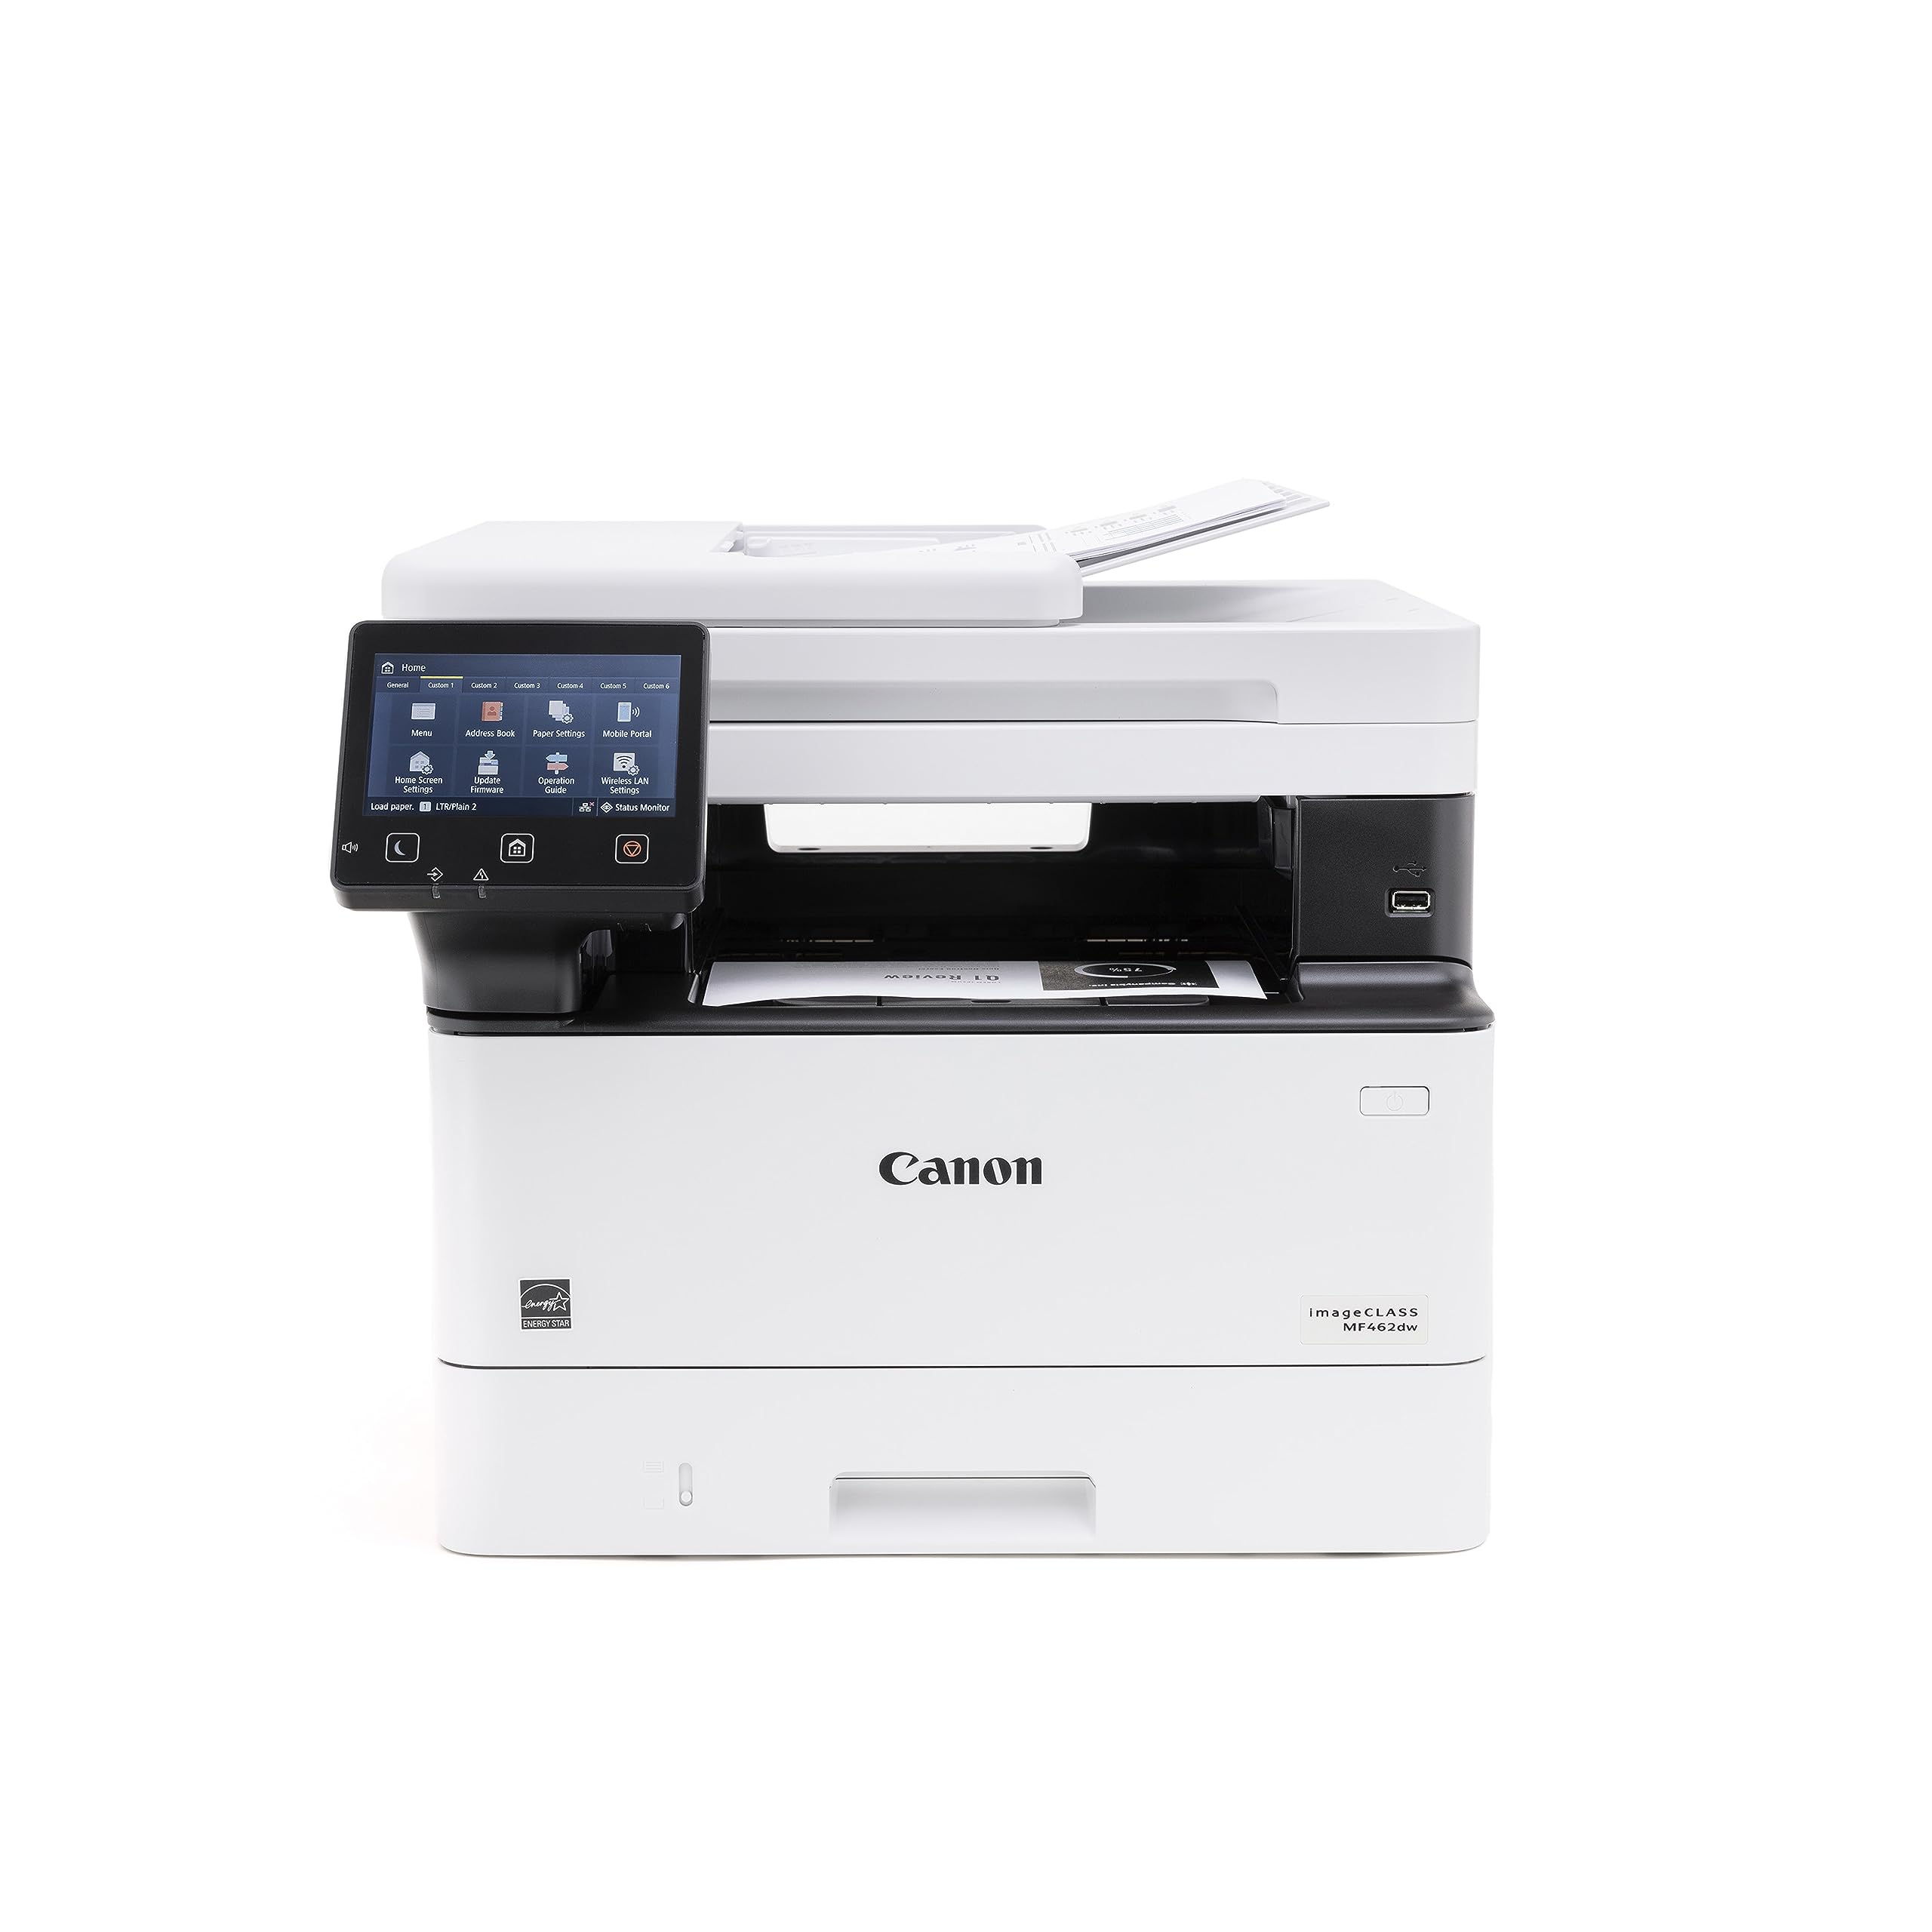 Canon imageCLASS MF462dw - All in One, Wireless, Mobile Ready, Duplex Laser Printer with Expandable Paper Capacity and 3 Year Limited Warranty